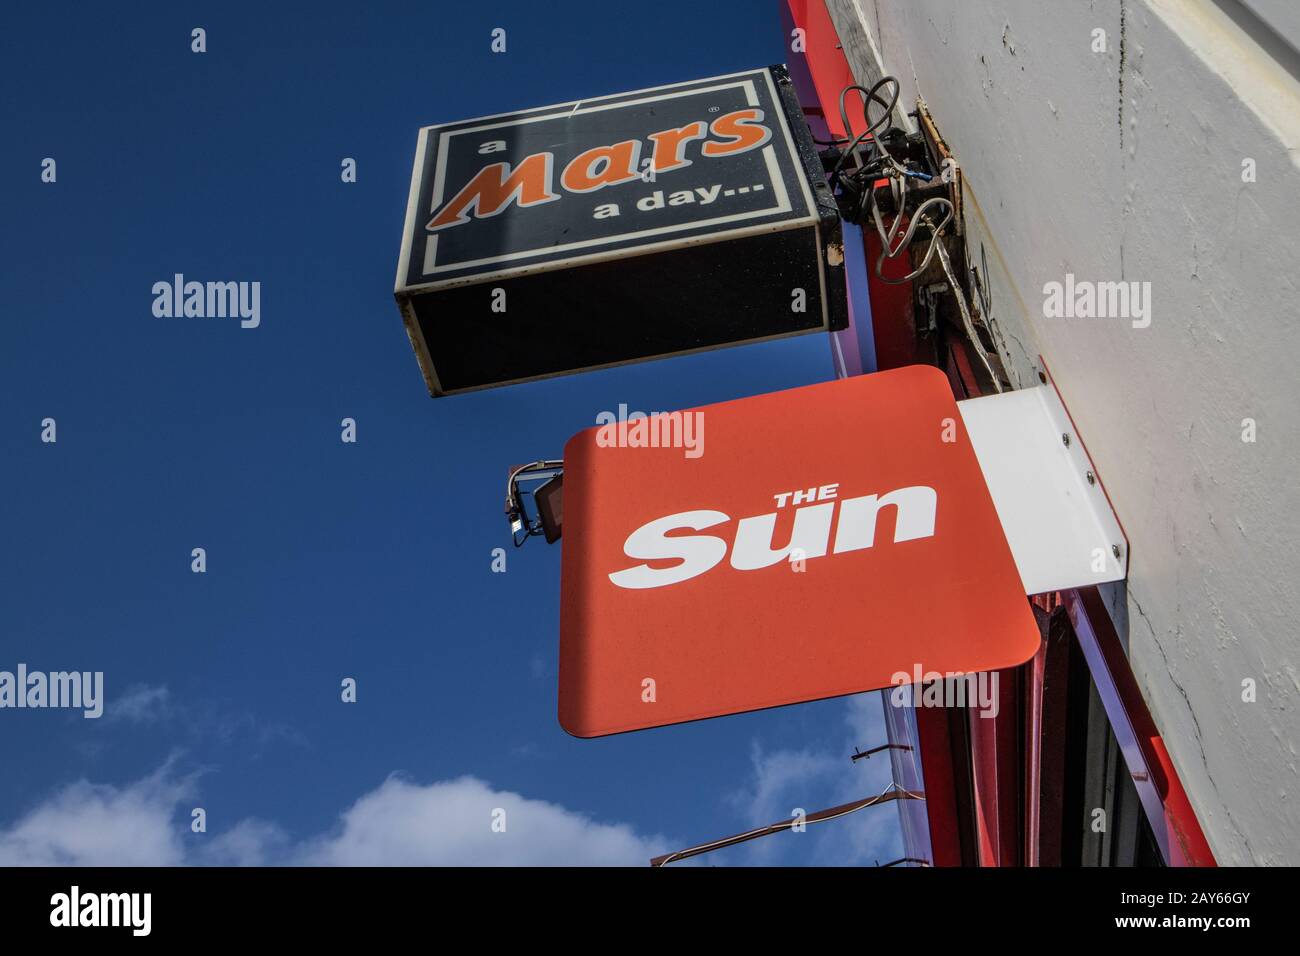 British tabloid newspaper The Sun and ' A Mars a day' sign sit on the exterior wall of a newsagent in Southeast London, London, UK Stock Photo